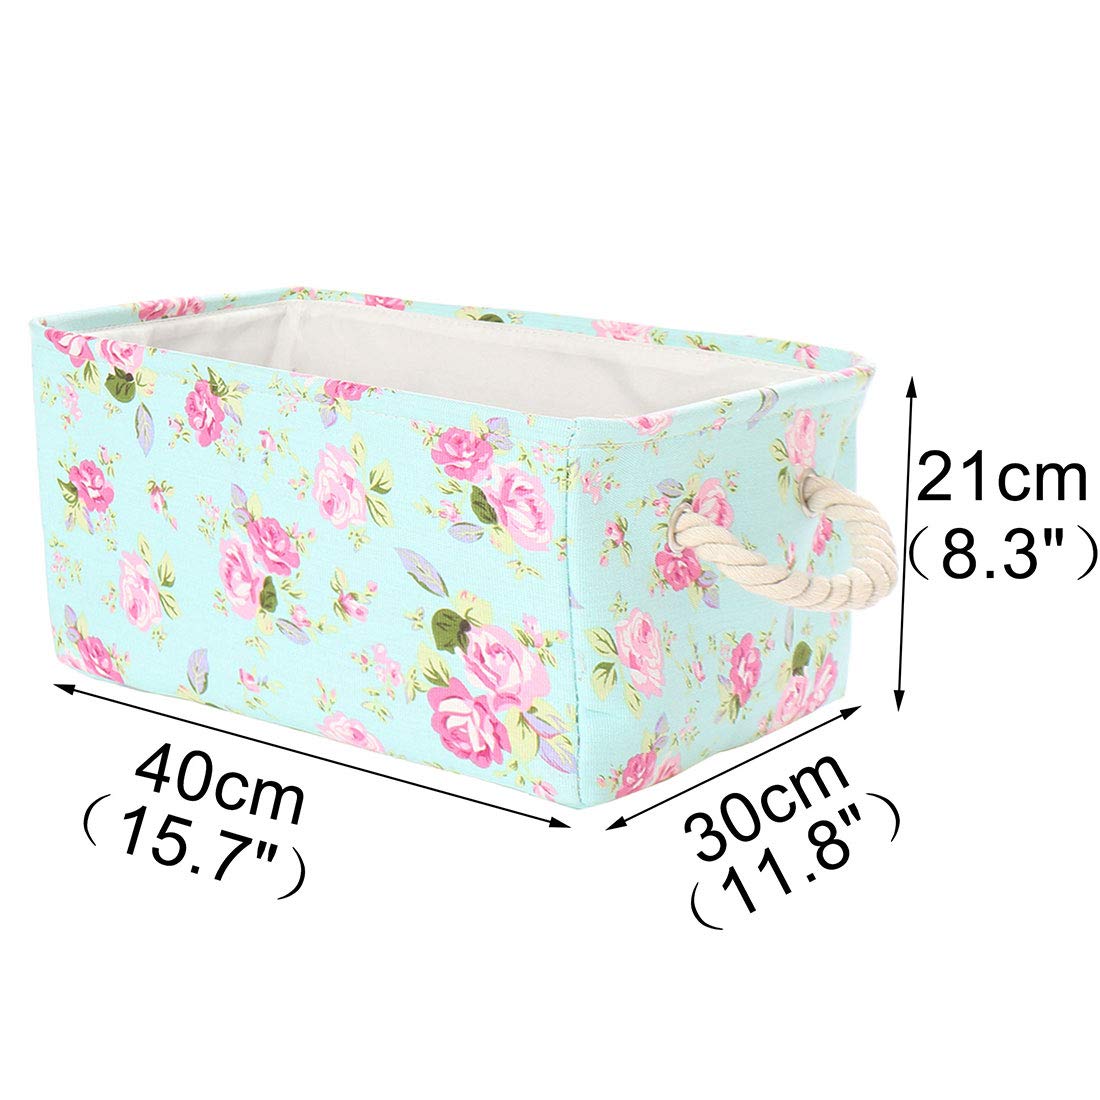 uxcell Storage Basket Bin with Rope Handles, Decorative Fabric Laundry Basket for Clothes Toy Closet Organizer,Floral (Medium -15.7"x11.8"x8.3")